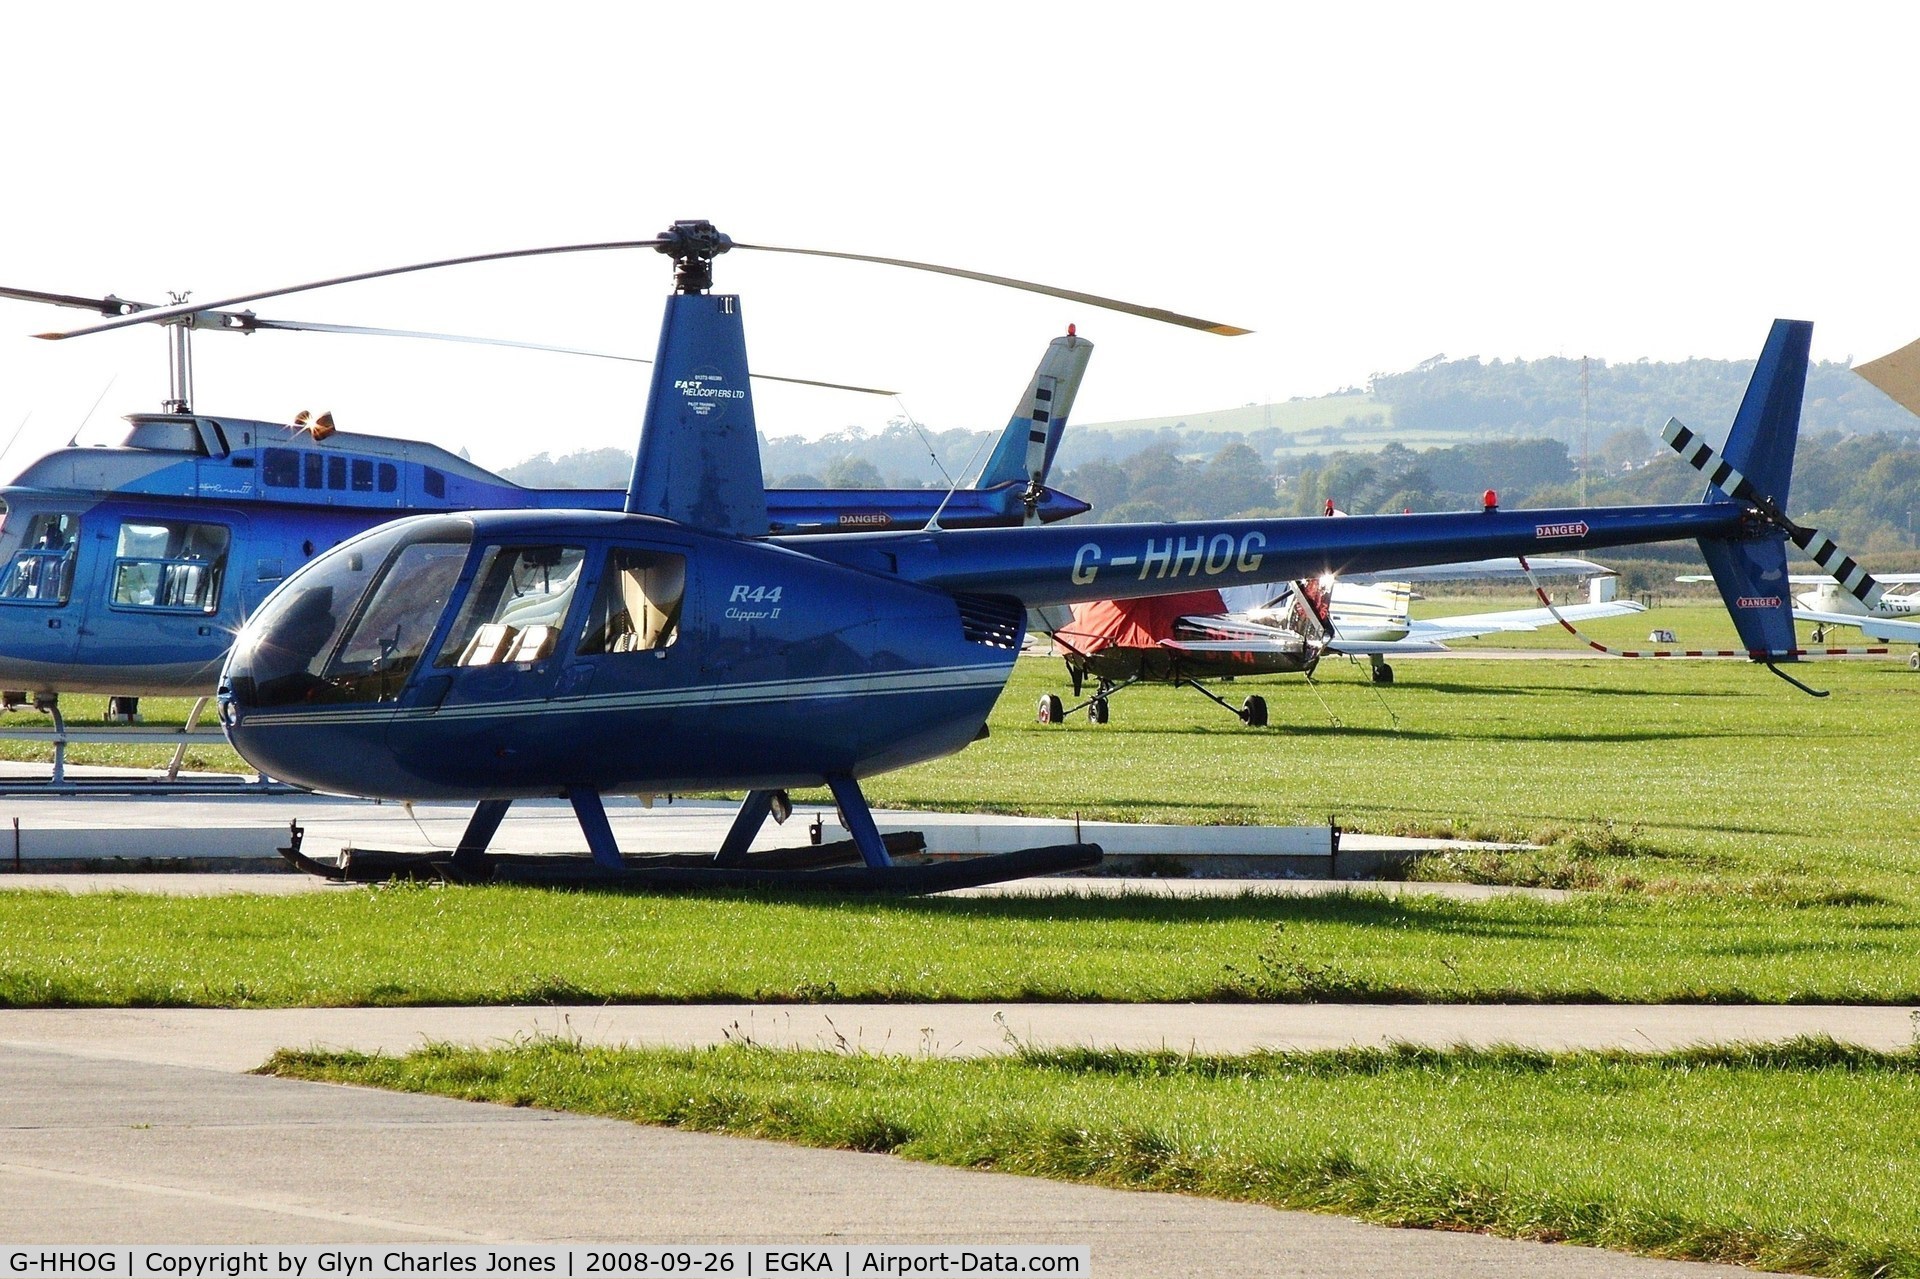 G-HHOG, 2004 Robinson R44 Clipper II C/N 10584, Operated by Fast Helicopters Ltd.